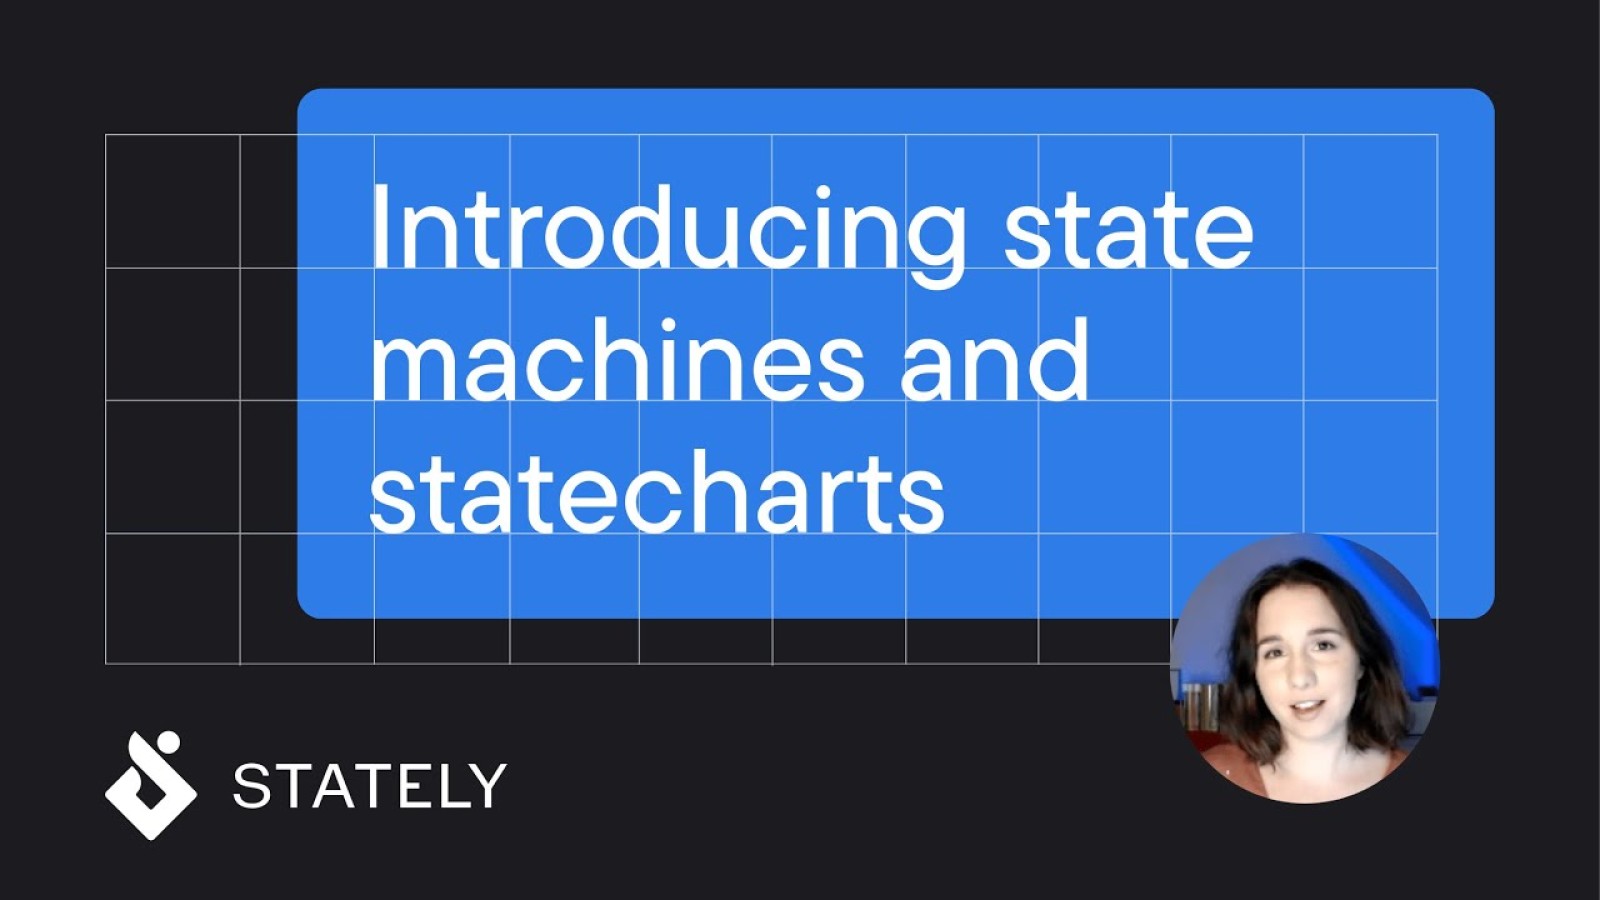 Introducting state machines and statecharts